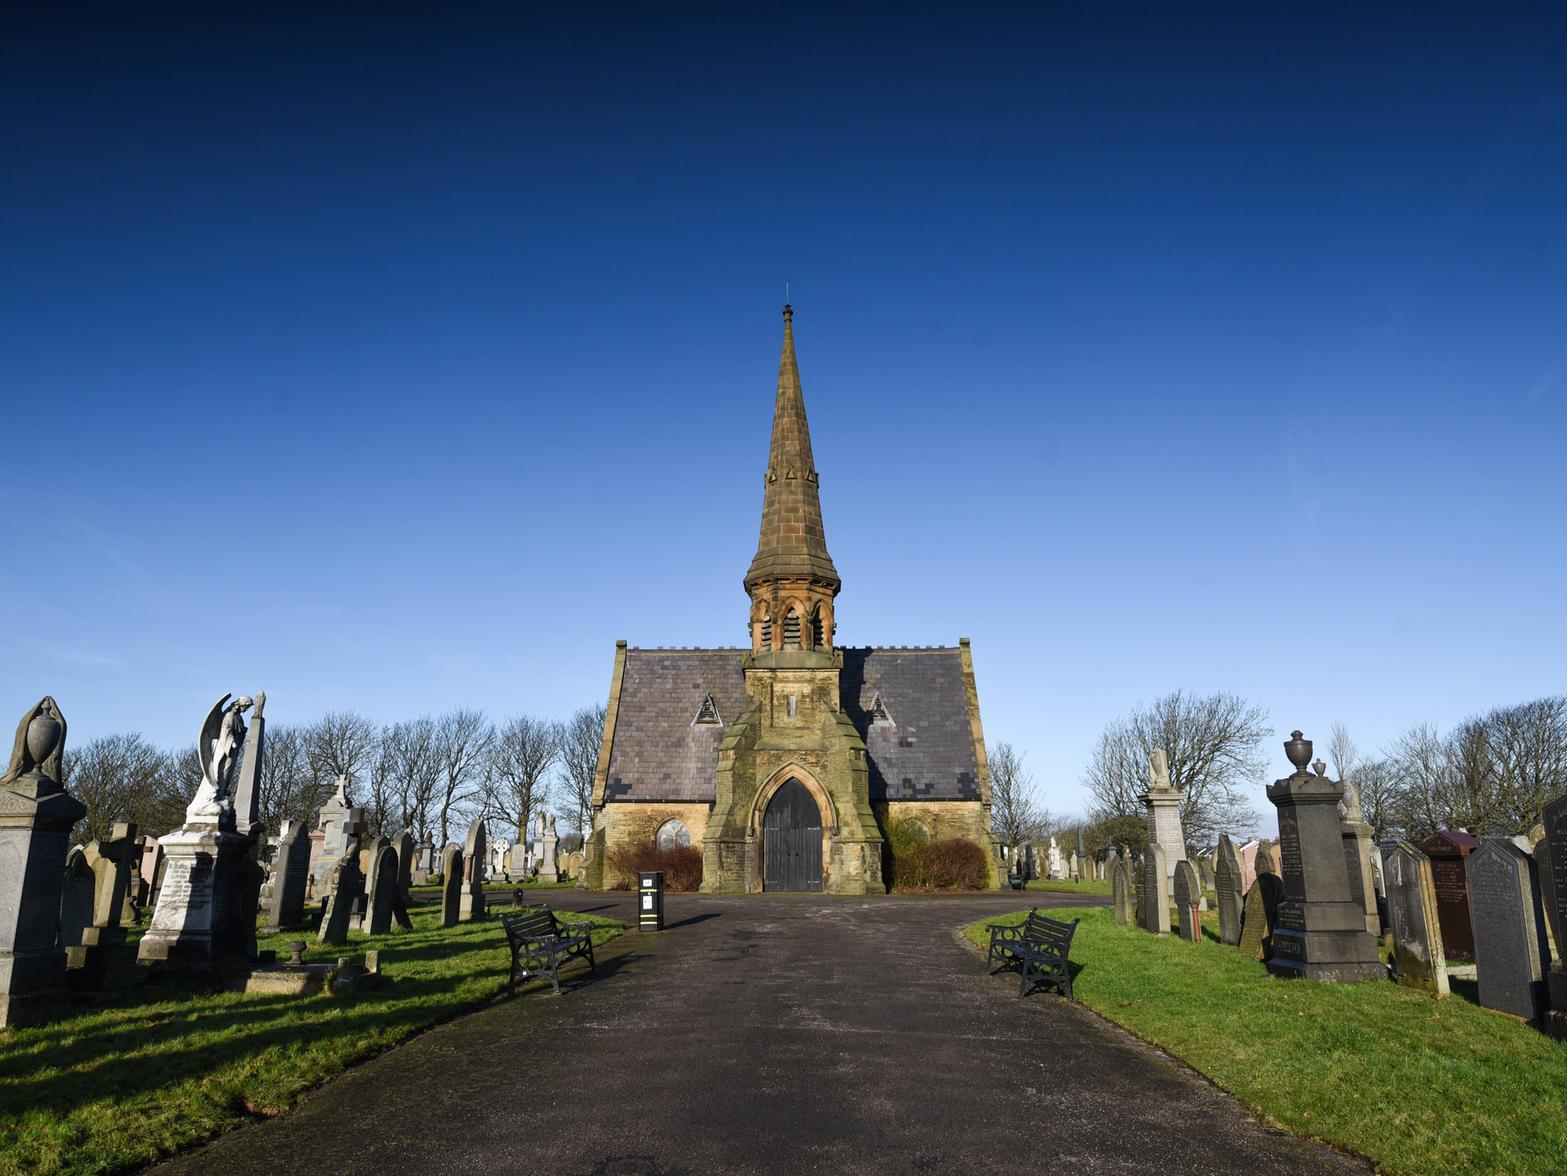 Mortuary chapel. Single tall storey, 3 bays, with a central 3-stepped-stage tower, the lower stage an entrance porch